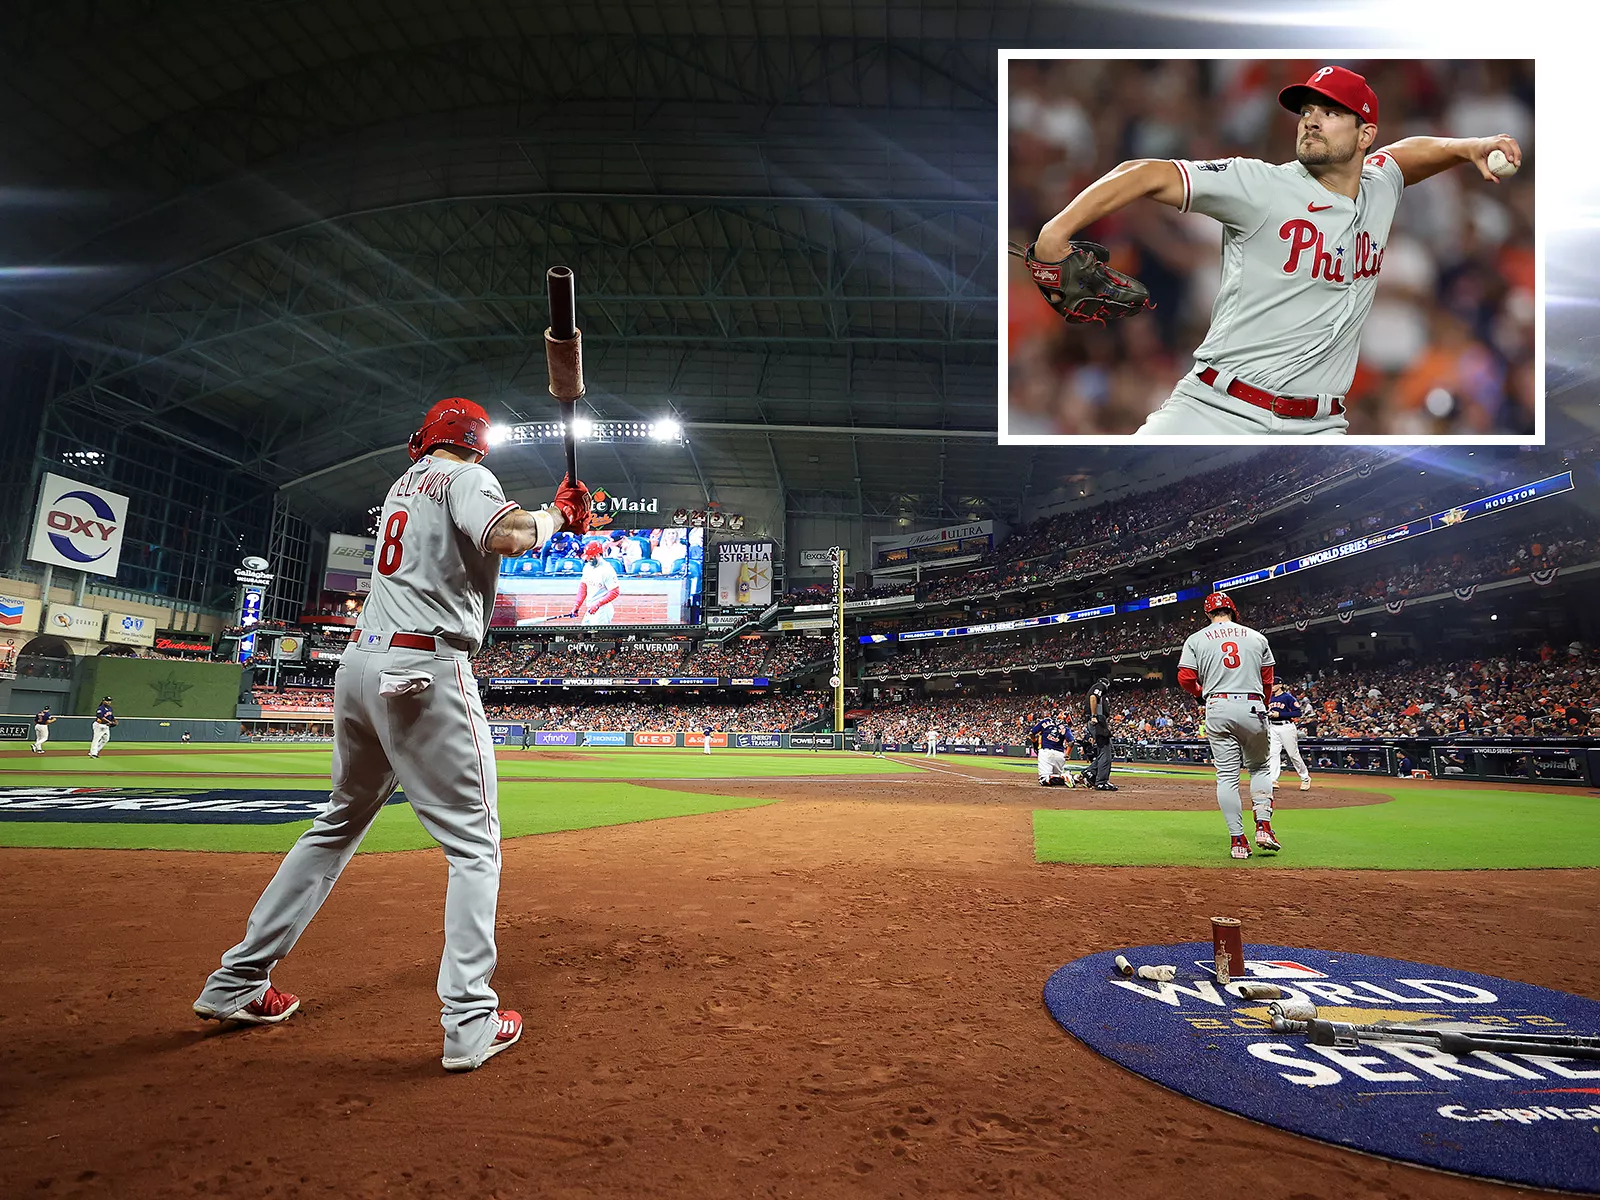 Phillies Fan Went to Wrong Stadium for World Series Game: No One